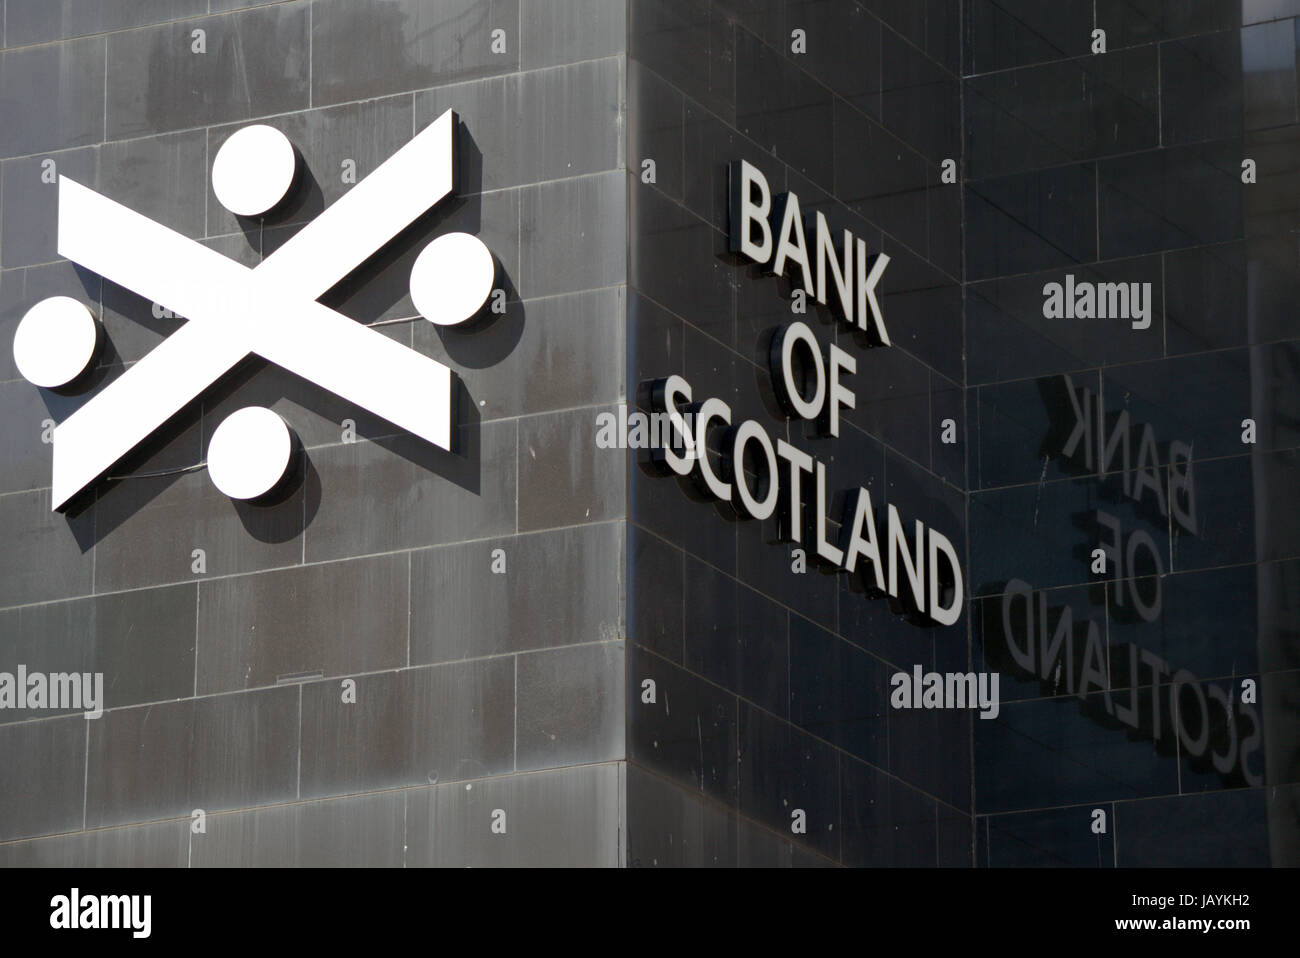 Bank of Scotland logo text on marble walls at St Enoch on Argyle street Stock Photo